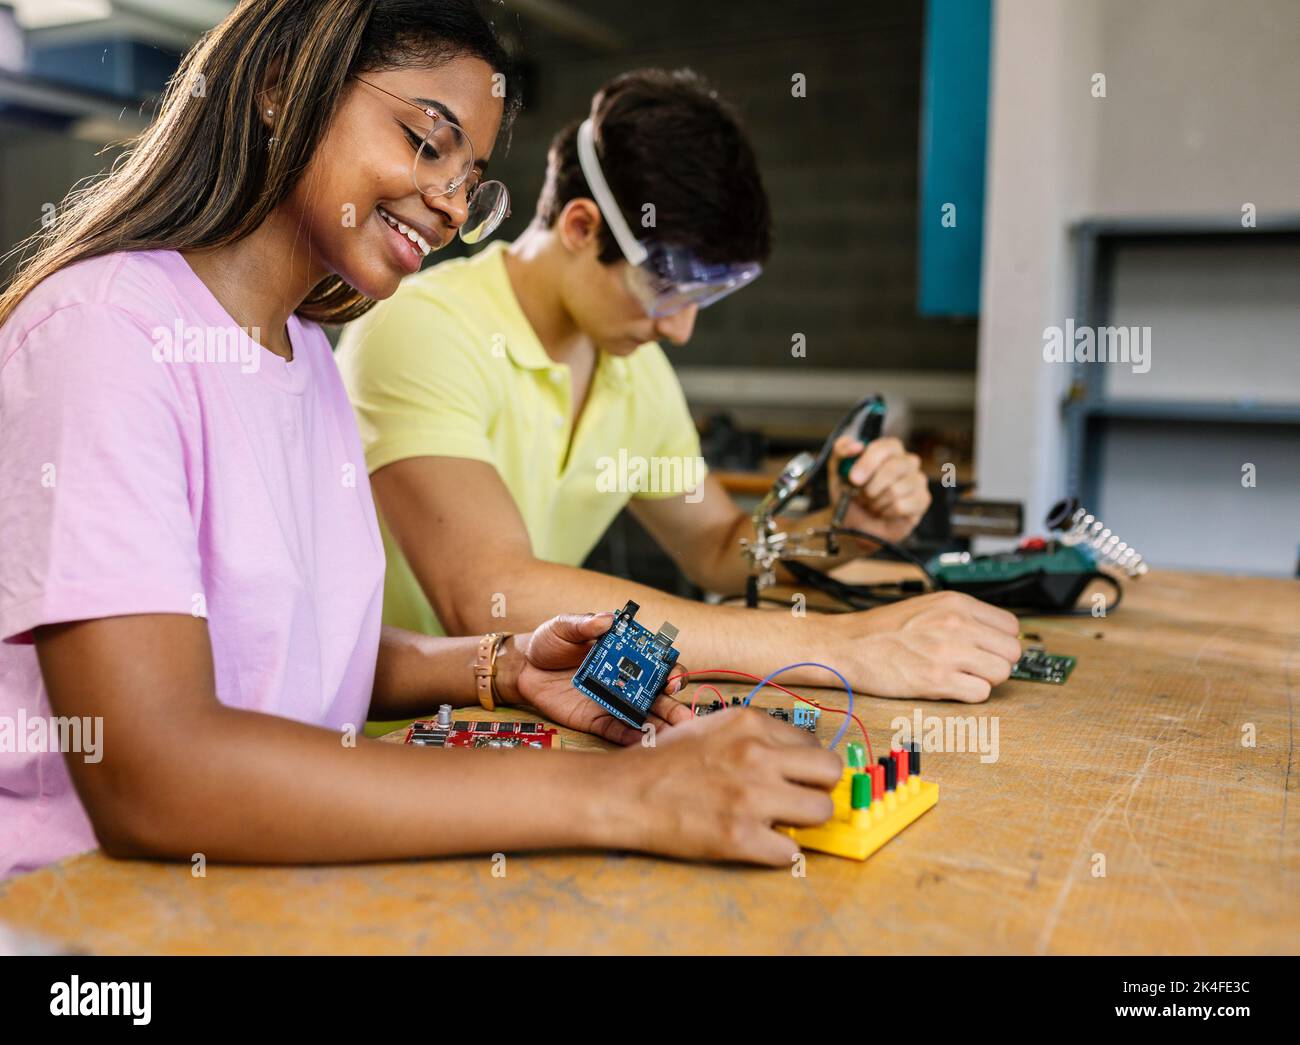 Young high school students learning together at stem robotics class Stock Photo